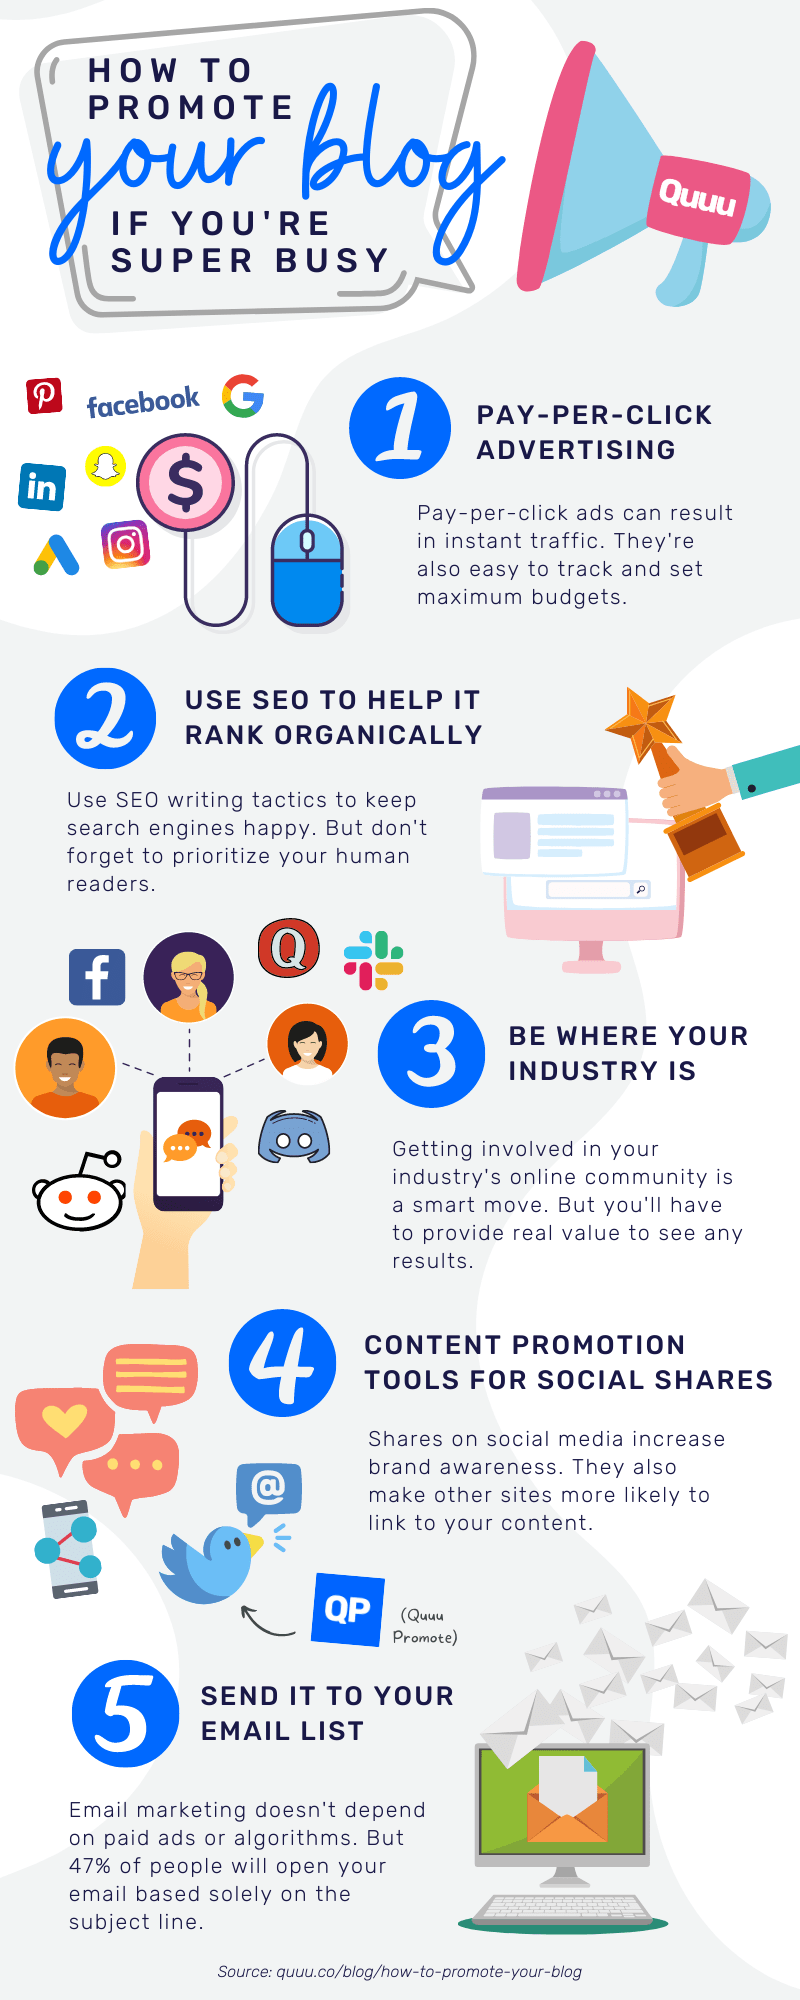 How to promote your blog if you're super busy:1. PPC advertising2. Use SEO to help it rank organically3. Be where your industry is online4. Use content promotion tools for social shares (like Quuu Promote)5. Send it to your email list